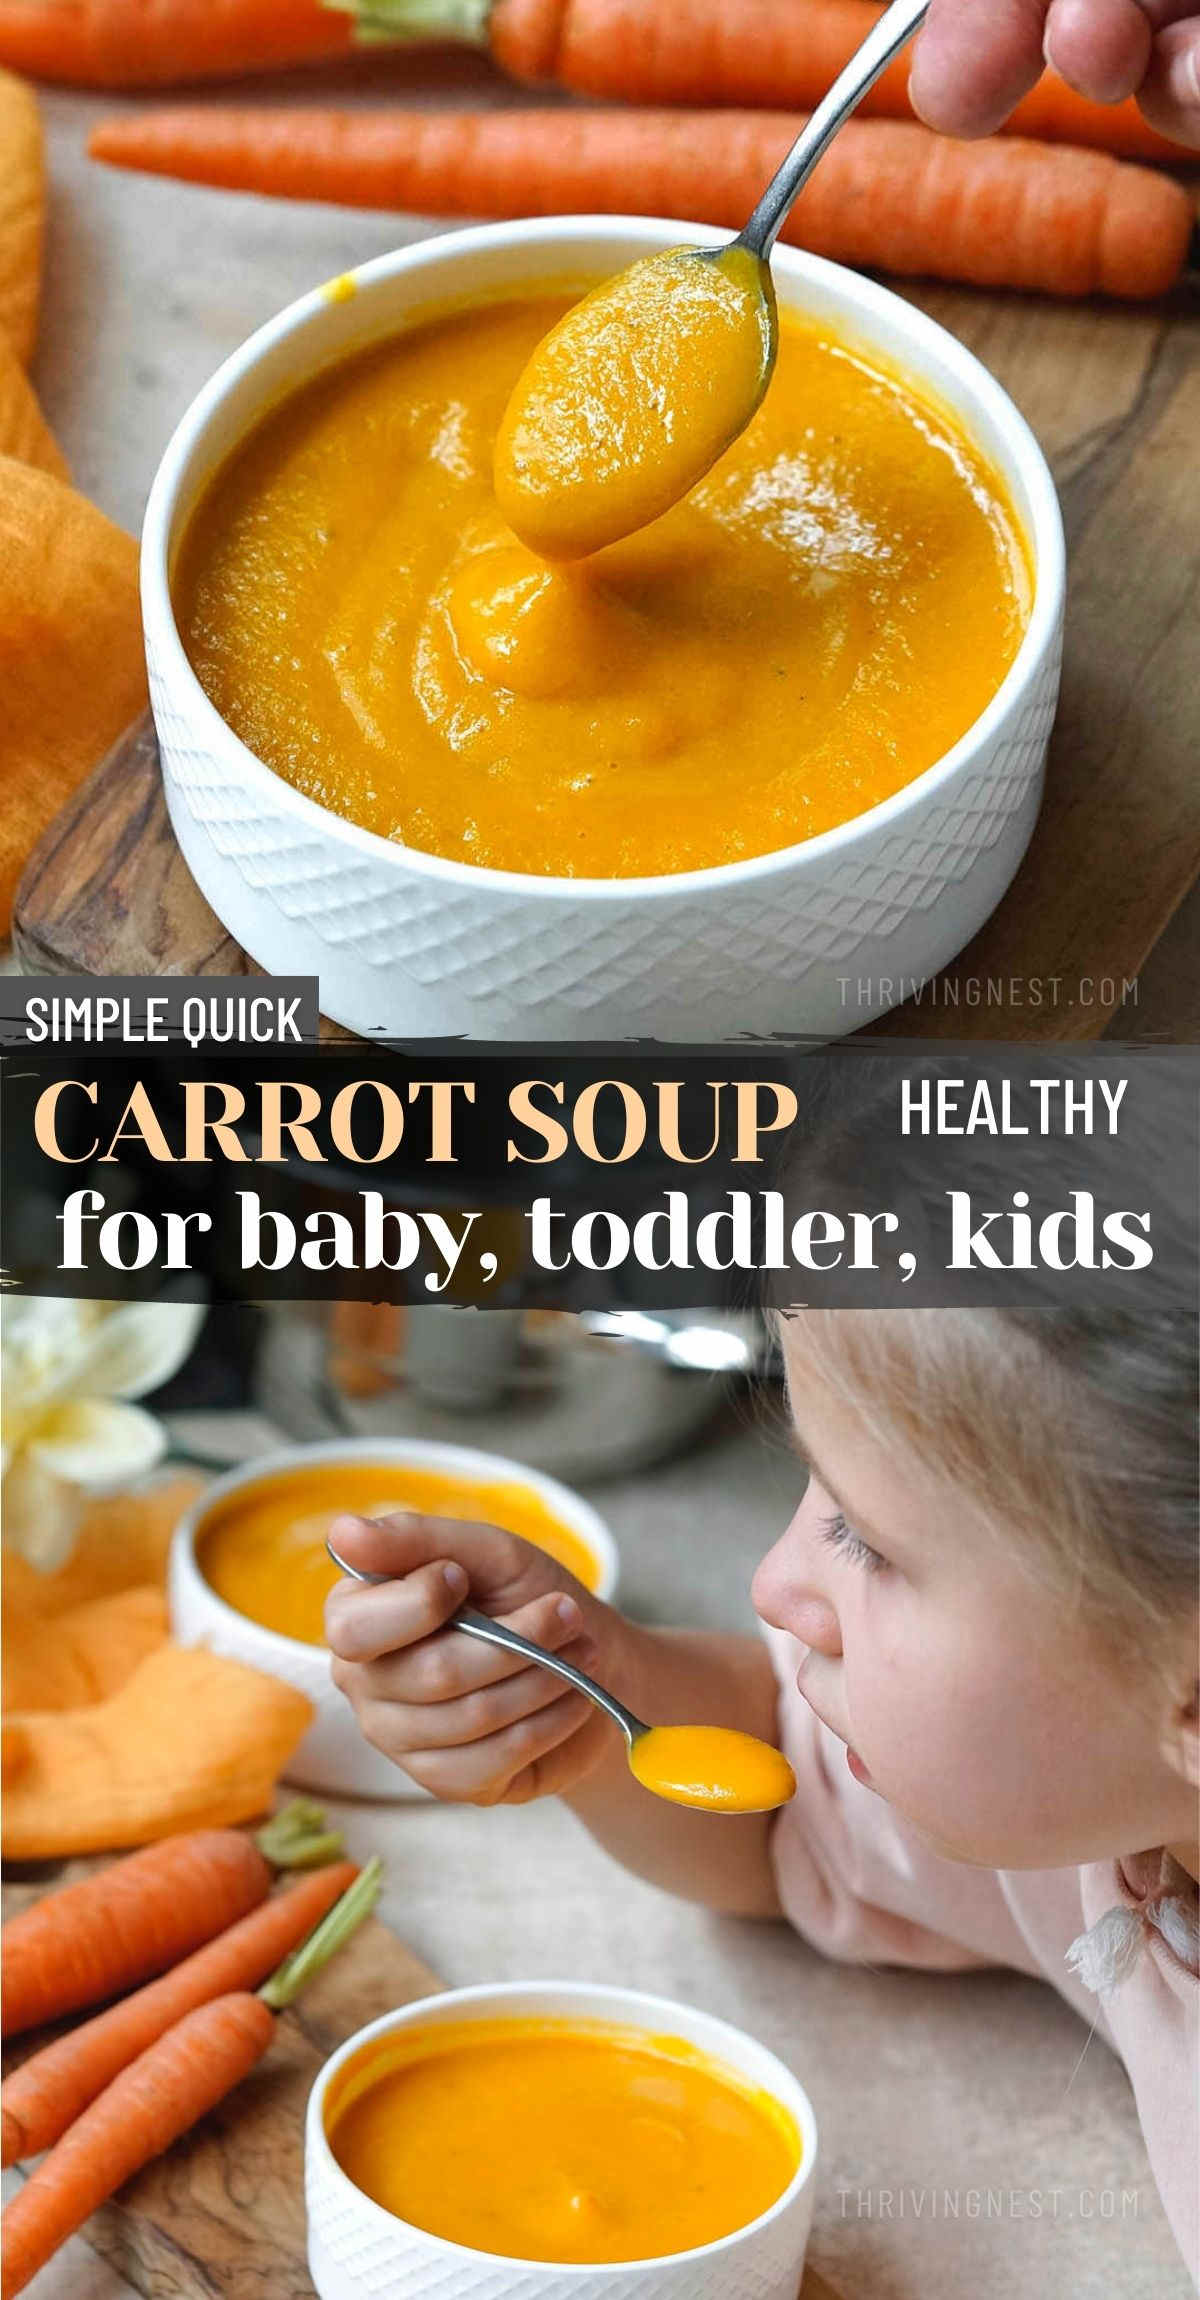 A healthy and delicious carrot soup recipe to introduce to your baby or toddler as their first complex meal. Carrots are a great source of nutrients and your little one will love the sweet and creamy taste. This baby carrot soup is suitable for babies starting solid foods at 6 months +, toddlers and older kids! #babycarrotsoup #carrotsoup #babysoup